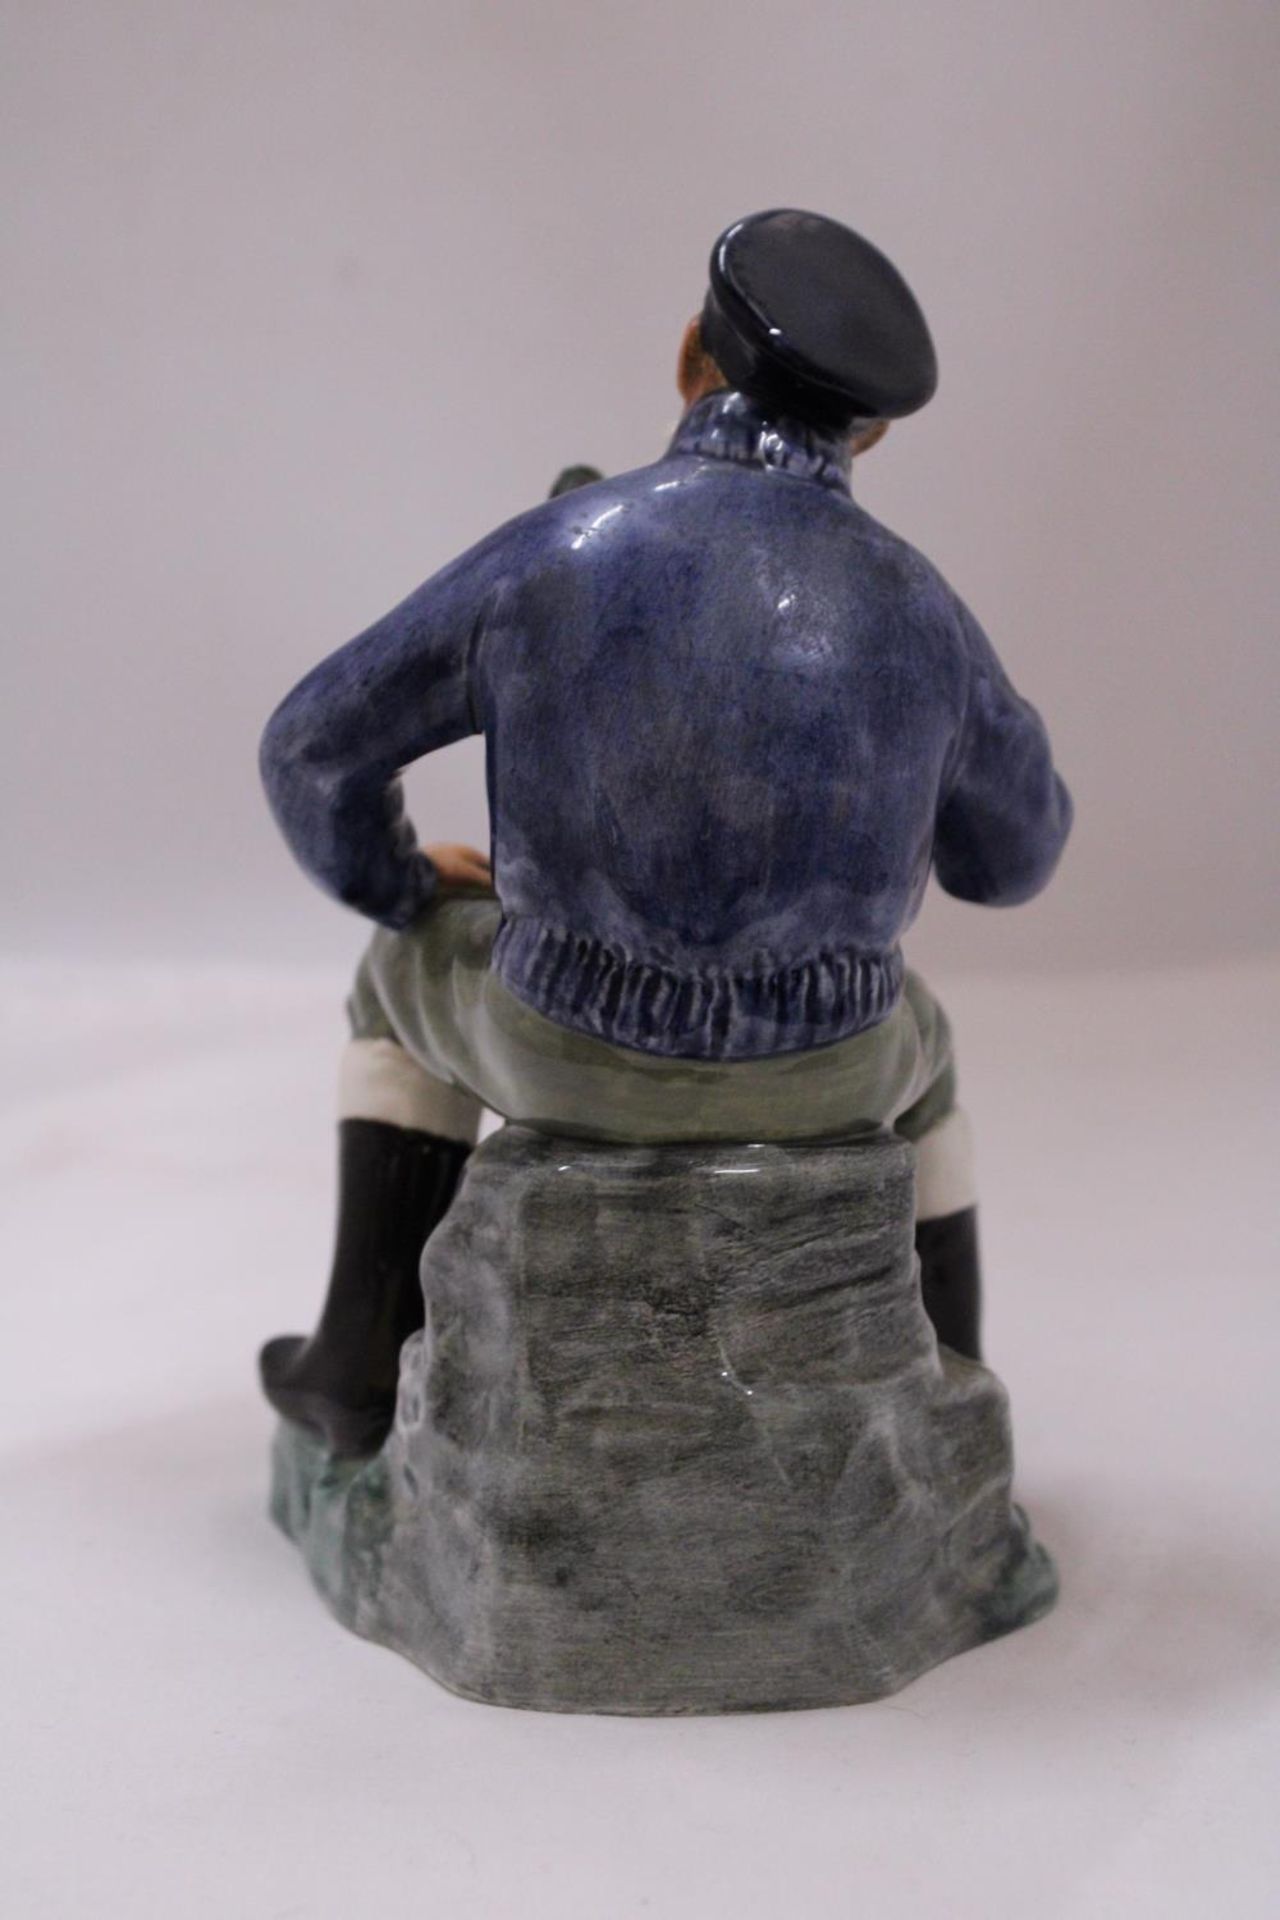 A ROYAL DOULTON "THE LOBSTER MAN" FIGURINE HN2317 - Image 3 of 5